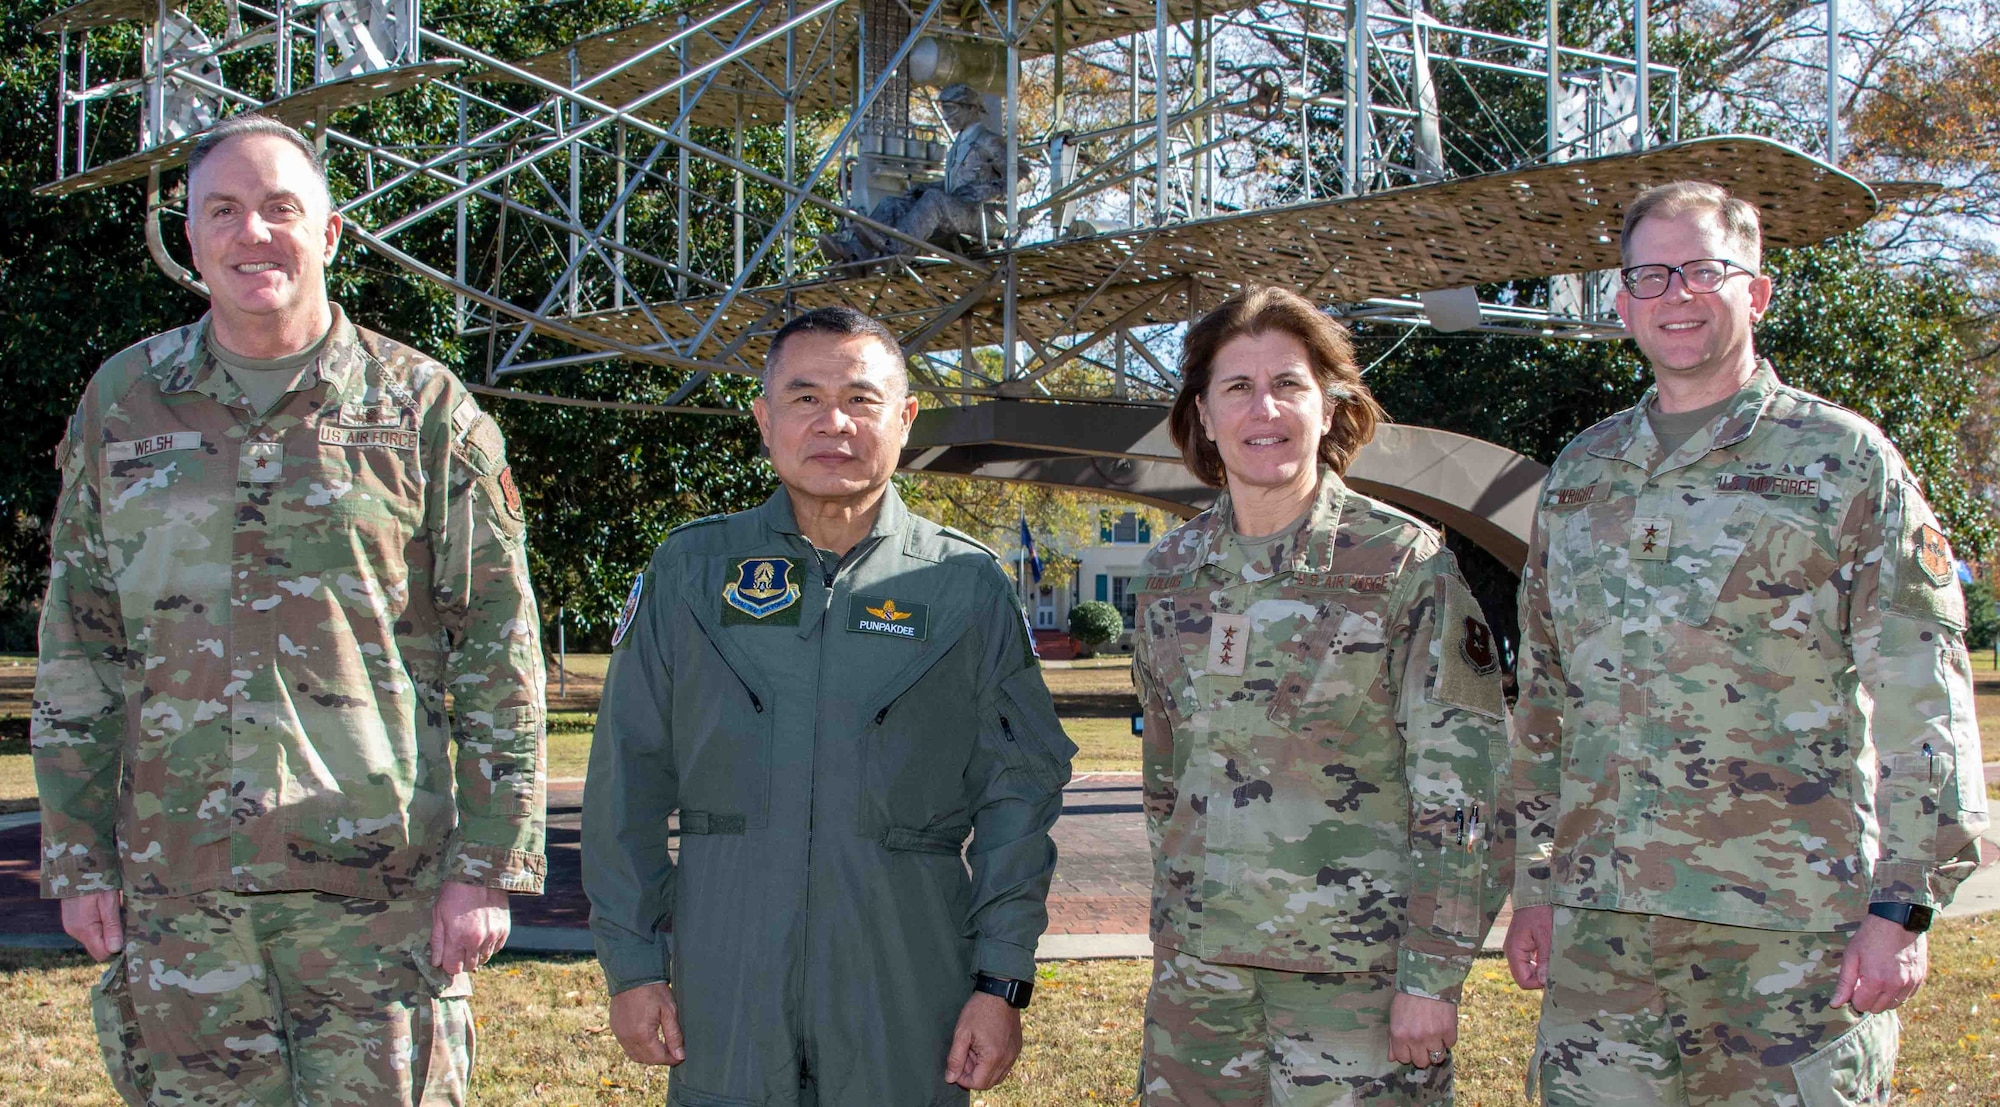 Royal Thai Air Force Commander-in-Chief Air Marshal Punpakdee Pattanakul (second from left) made his first visit to Air University and Maxwell Air Force Base, Alabama, Dec. 12, 2023, since assuming his position in October 2023. His visit was a continuation of the Chief of Staff of the Air Force Counterpart Visits. The visits facilitate key leader engagements and highlight the service’s units, organizations and installations. Pictured with Punpakdee are Lt. Gen. Andrea Tullos (third from left), Air University commander and president; Maj. Gen. Parker Wright (far right), Air University deputy commander, and commander, Curtis E. LeMay Center for Doctrine Development and Education; and escorting general officer Brig. Gen. Gent Welsh, assistant adjutant general and commander Washington Air National Guard, Camp Murray, Washington.